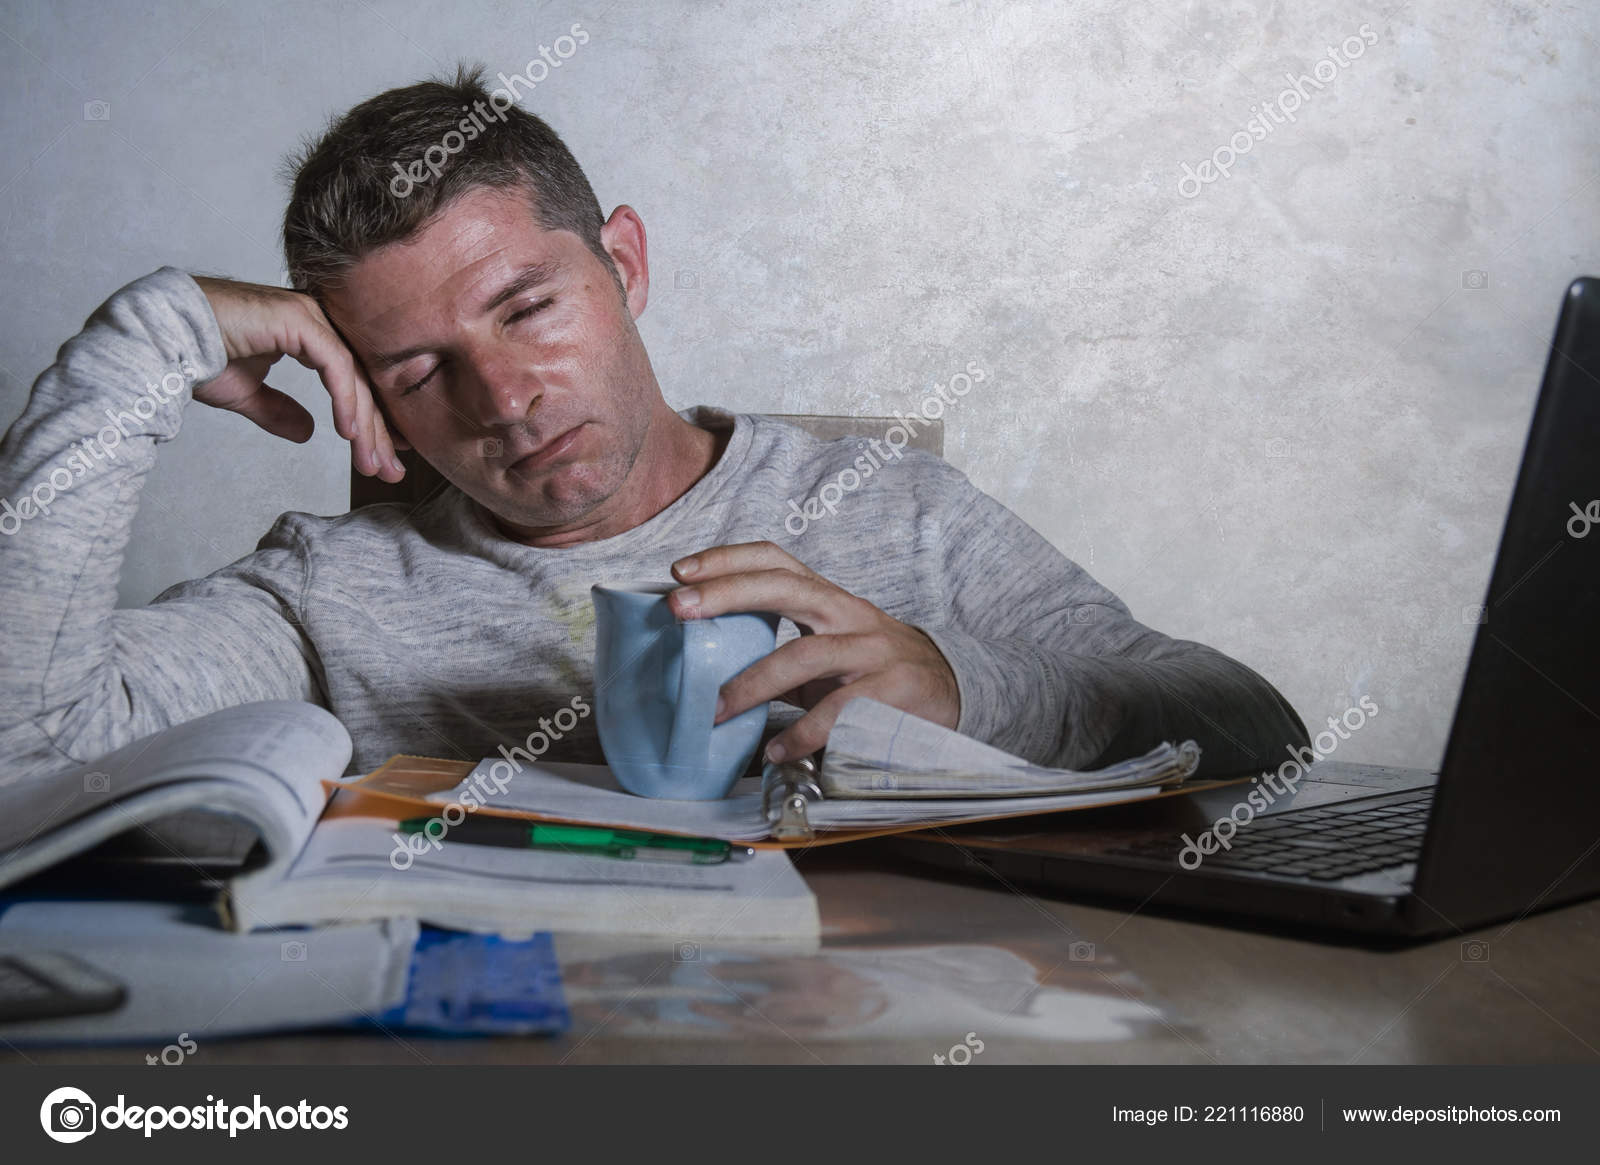 Young Exhausted Sleepy Man Working Stress Home Desk Laptop